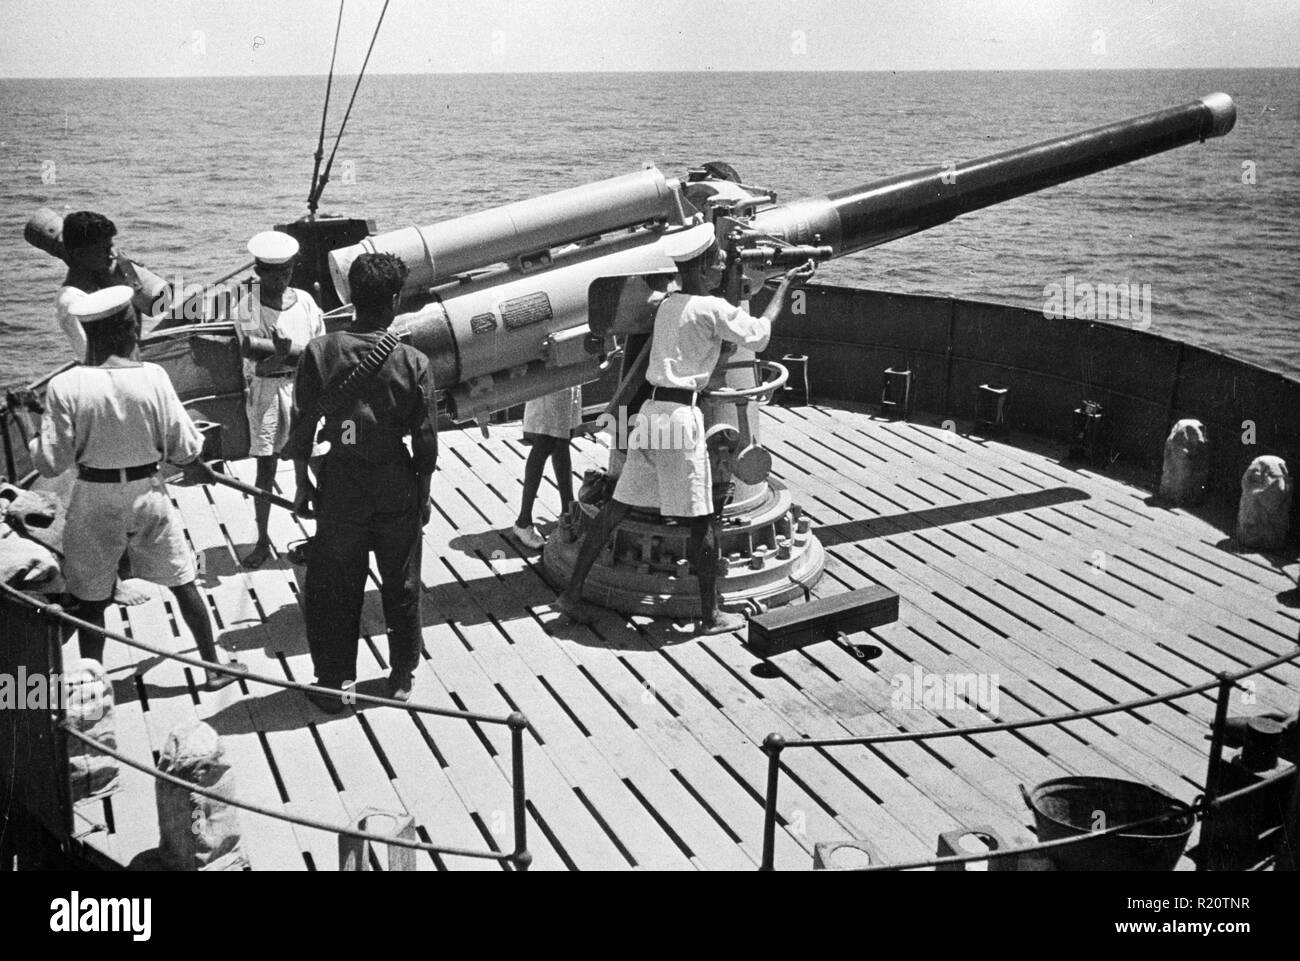 Photograph of On duty with seamen of the Royal Indian Navy on active service in Eastern waters. Captured Italian equipment on board often proves these ships have engaged in successful action World War II. Dated 1942 Stock Photo